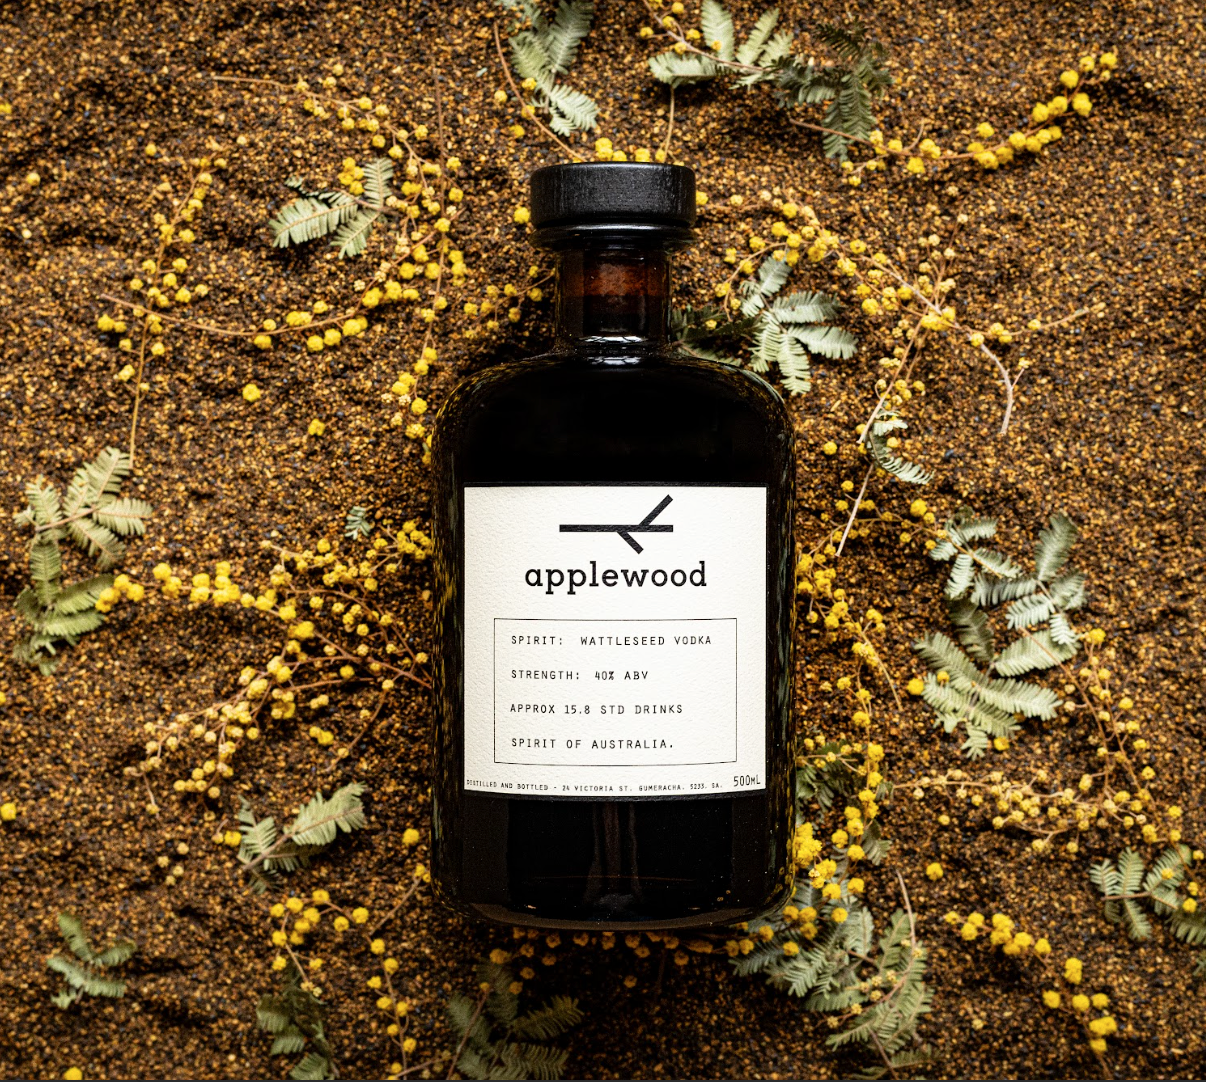 Journey to the Heart of Australia with Wattleseed.